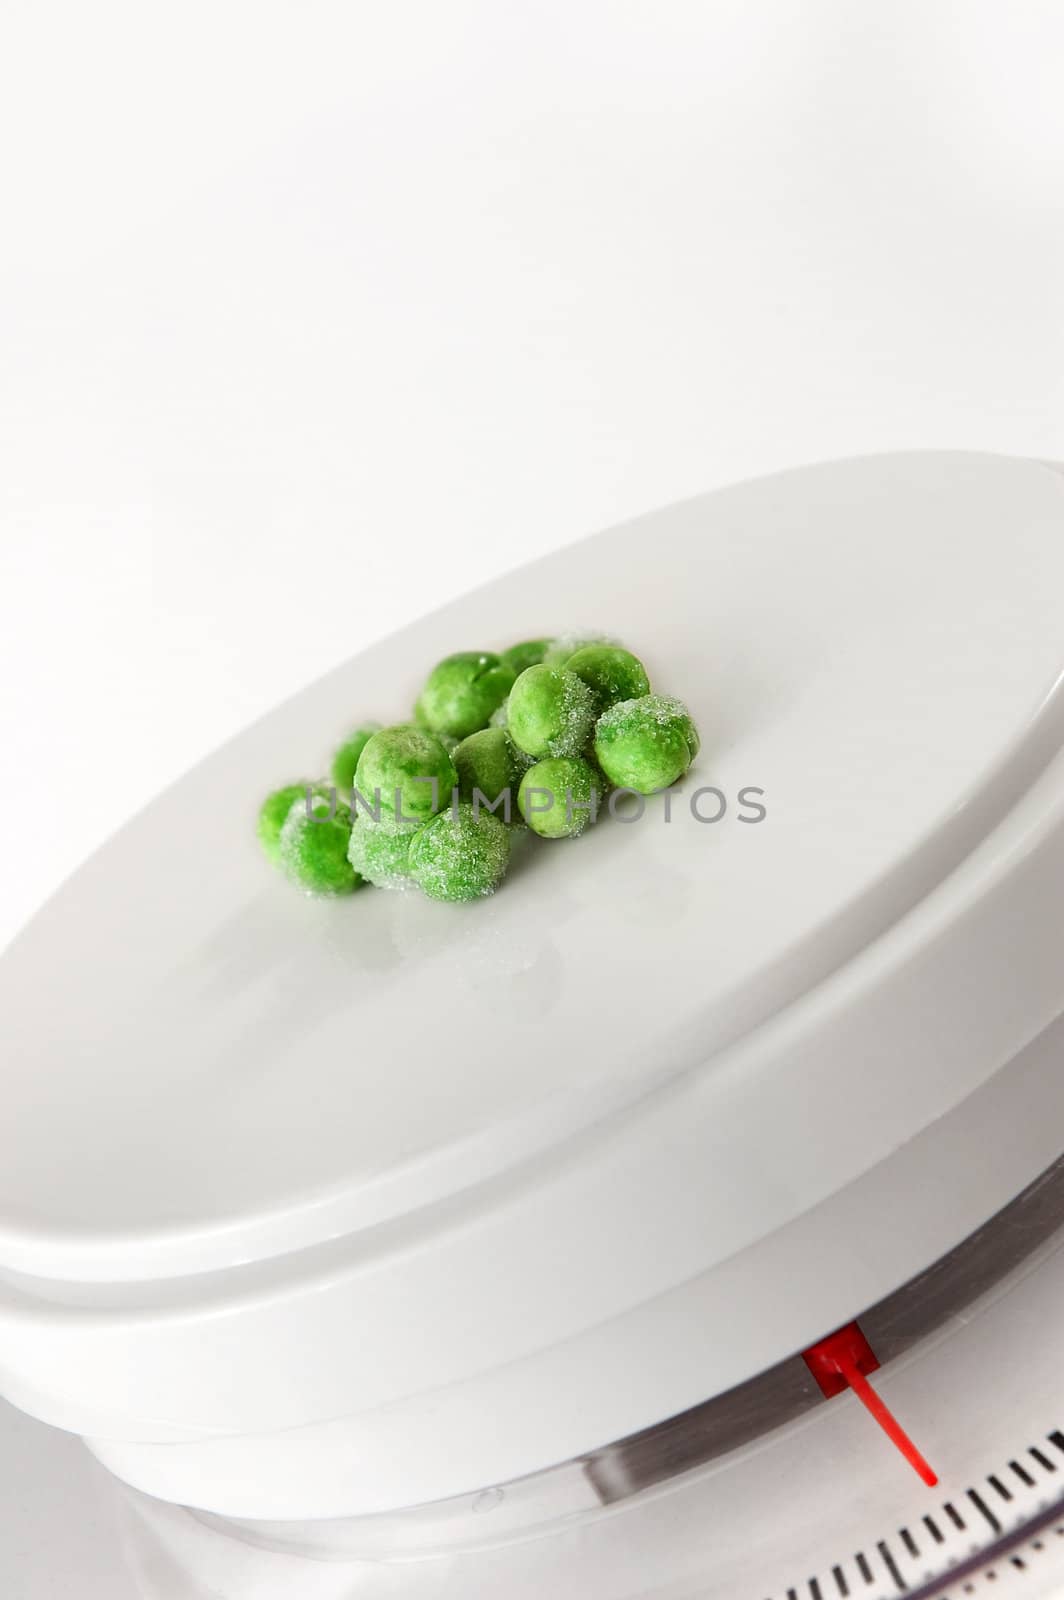 Frozen peas on weighing scale by maggiemolloy